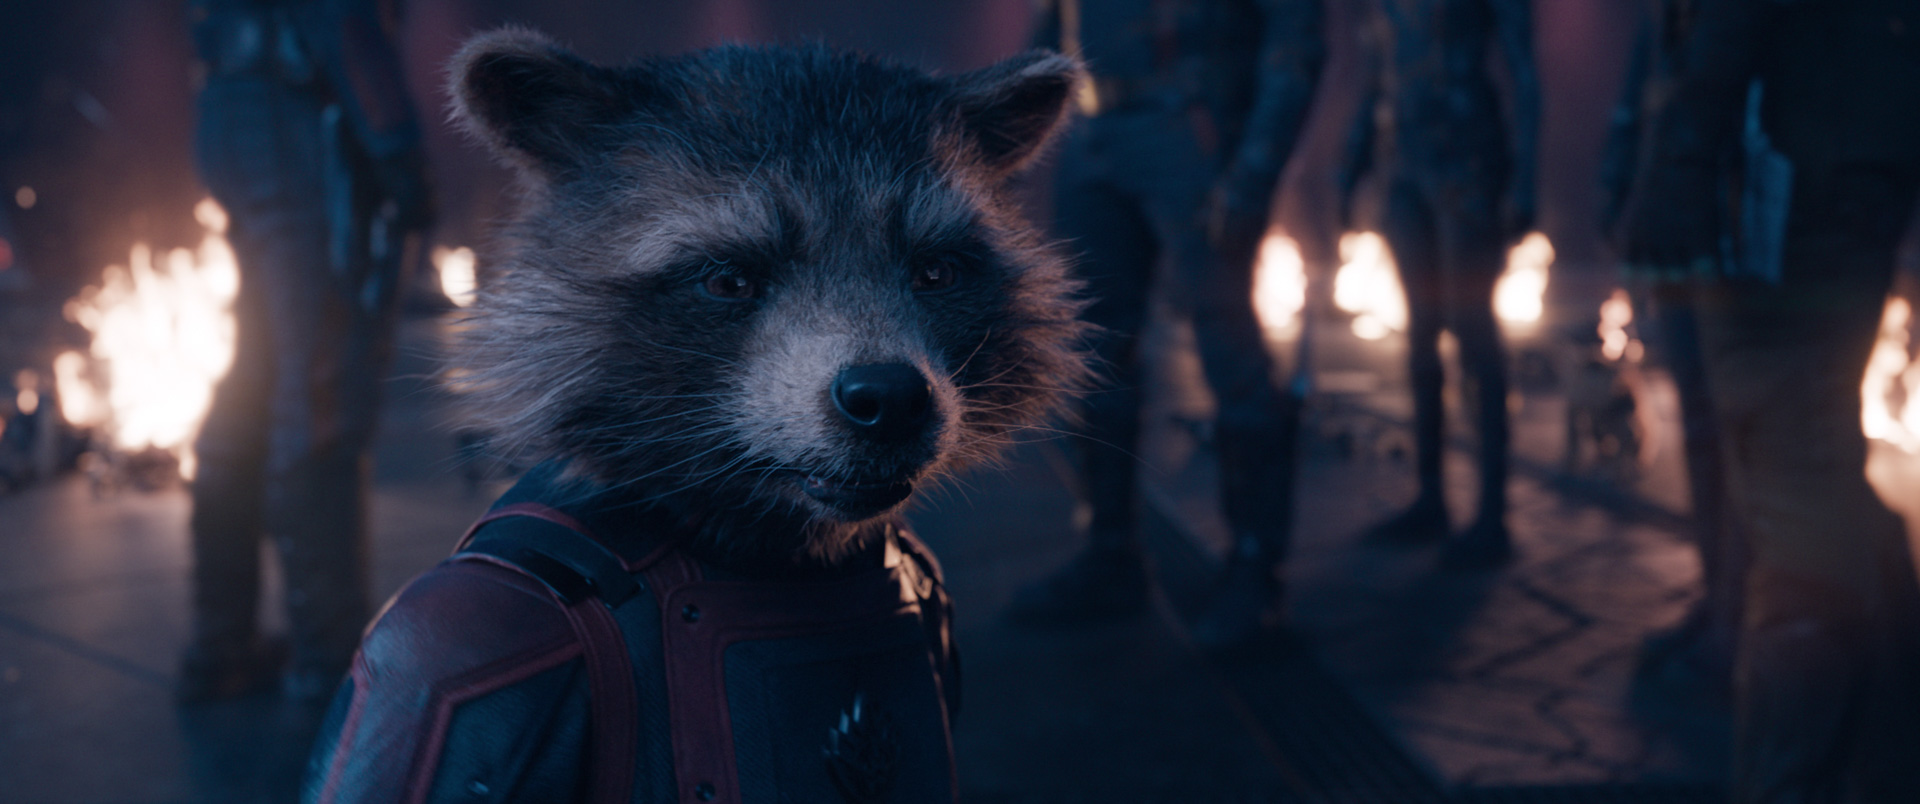 A close-up image of Rocket the raccoon in Guardians of the Galaxy Vol. 3. He appears glum, and the legs of his fellow Guardians are visible in the dark background.